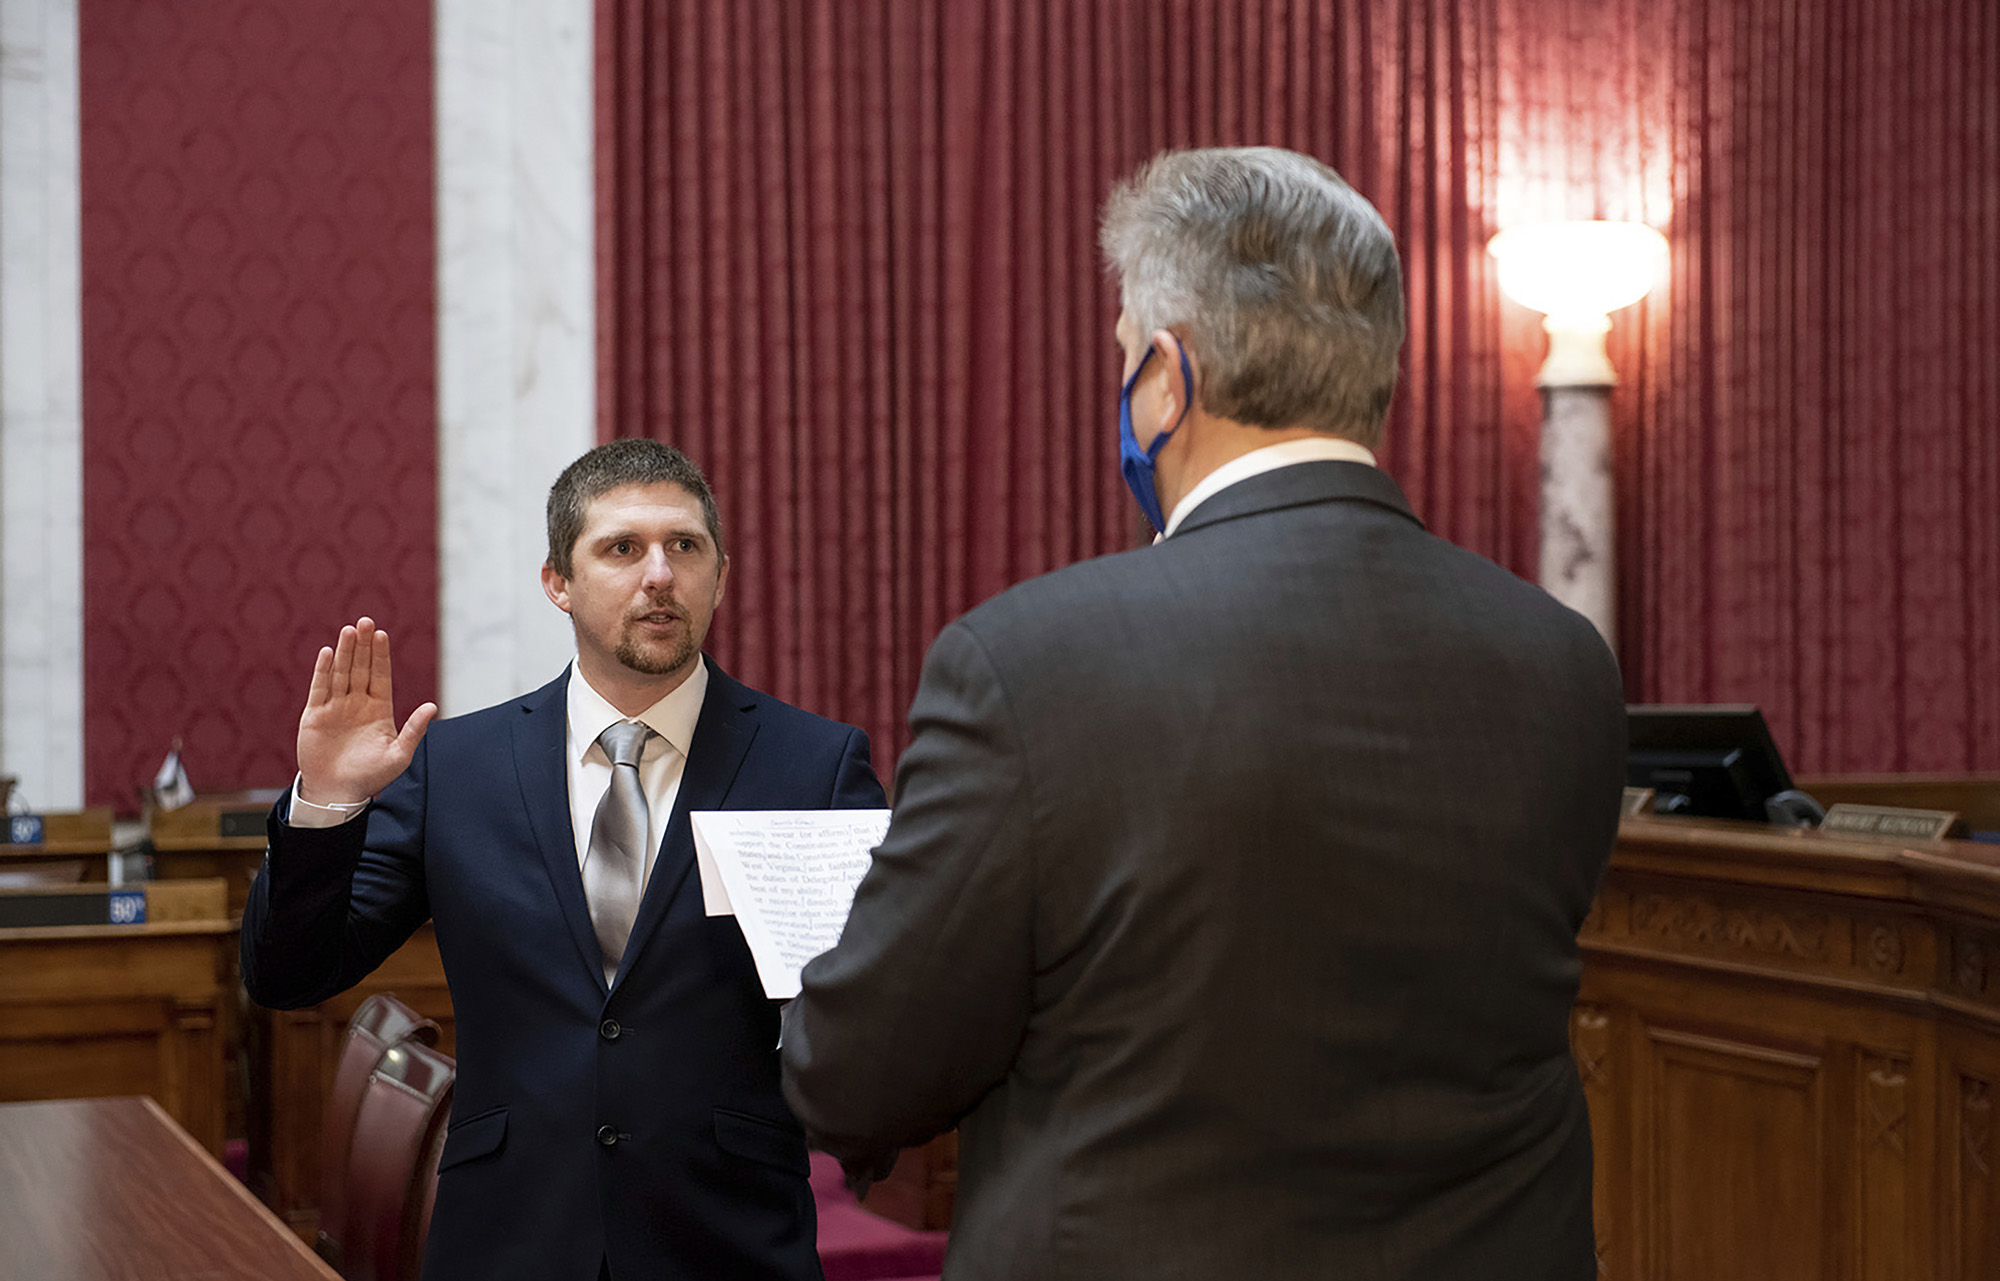 PHOTO: West Virginia House of Delegates member Derrick Evans is given the oath of office in the House chamber at the state Capitol in Charleston, W.Va., Dec. 14, 2020.